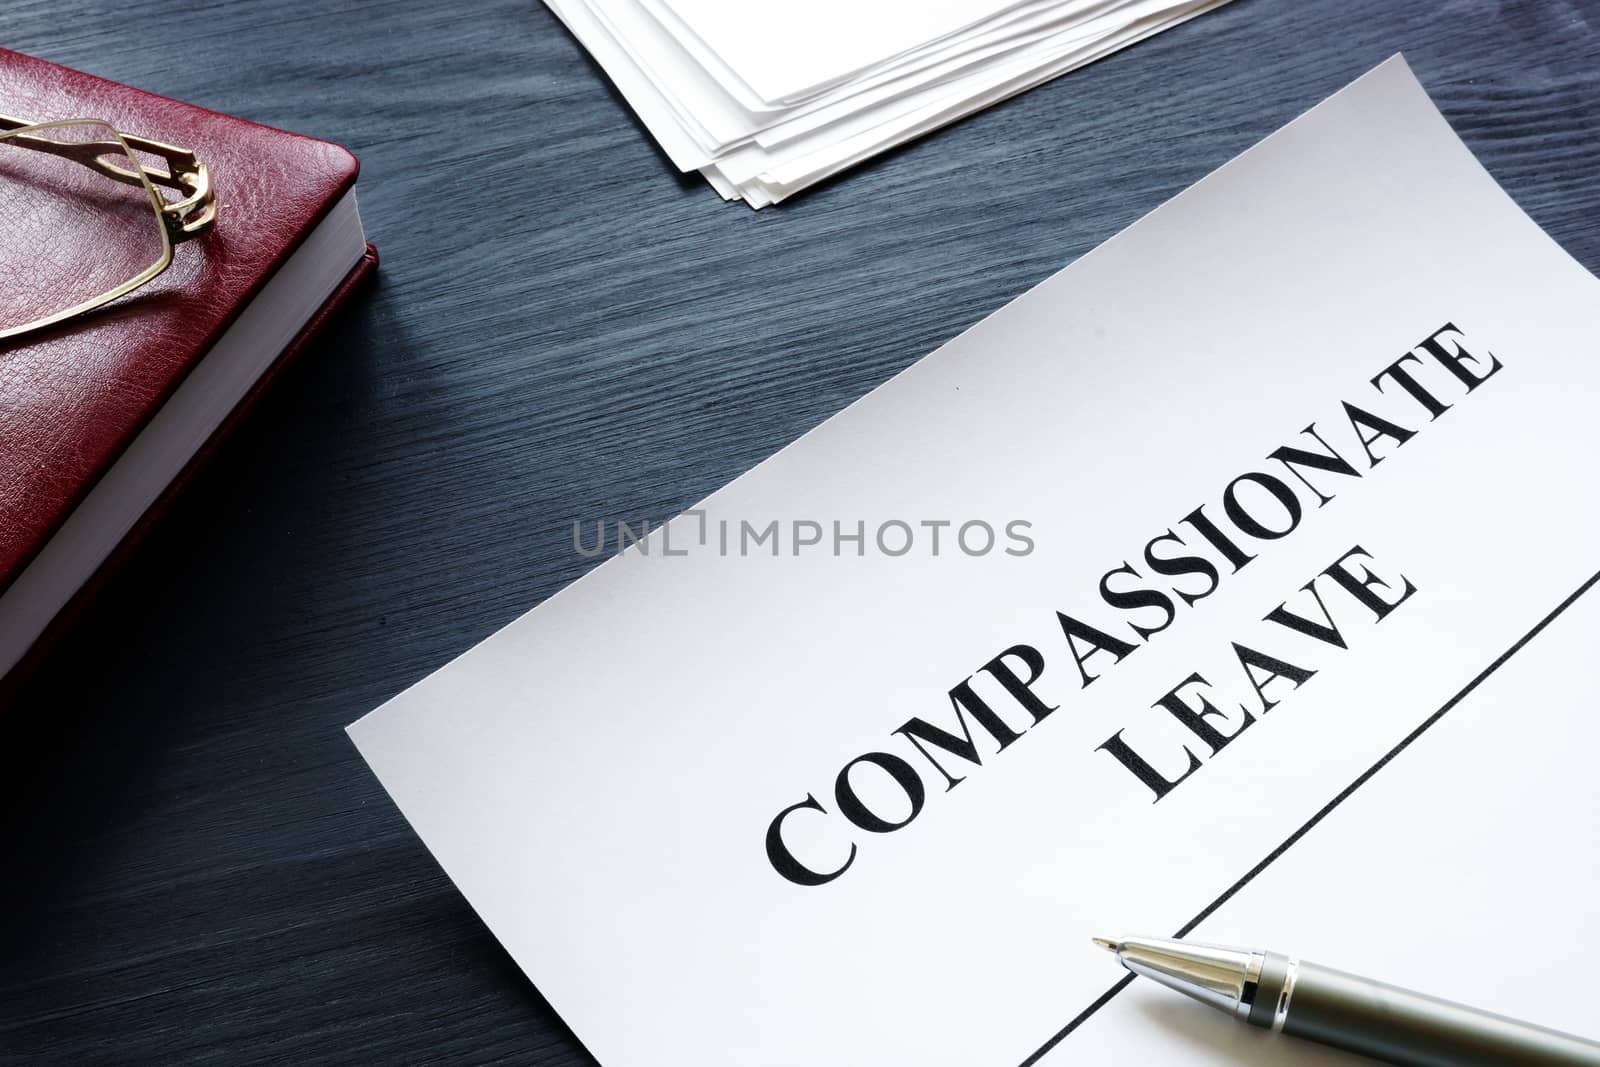 Compassionate leave request form with pen on the desk.